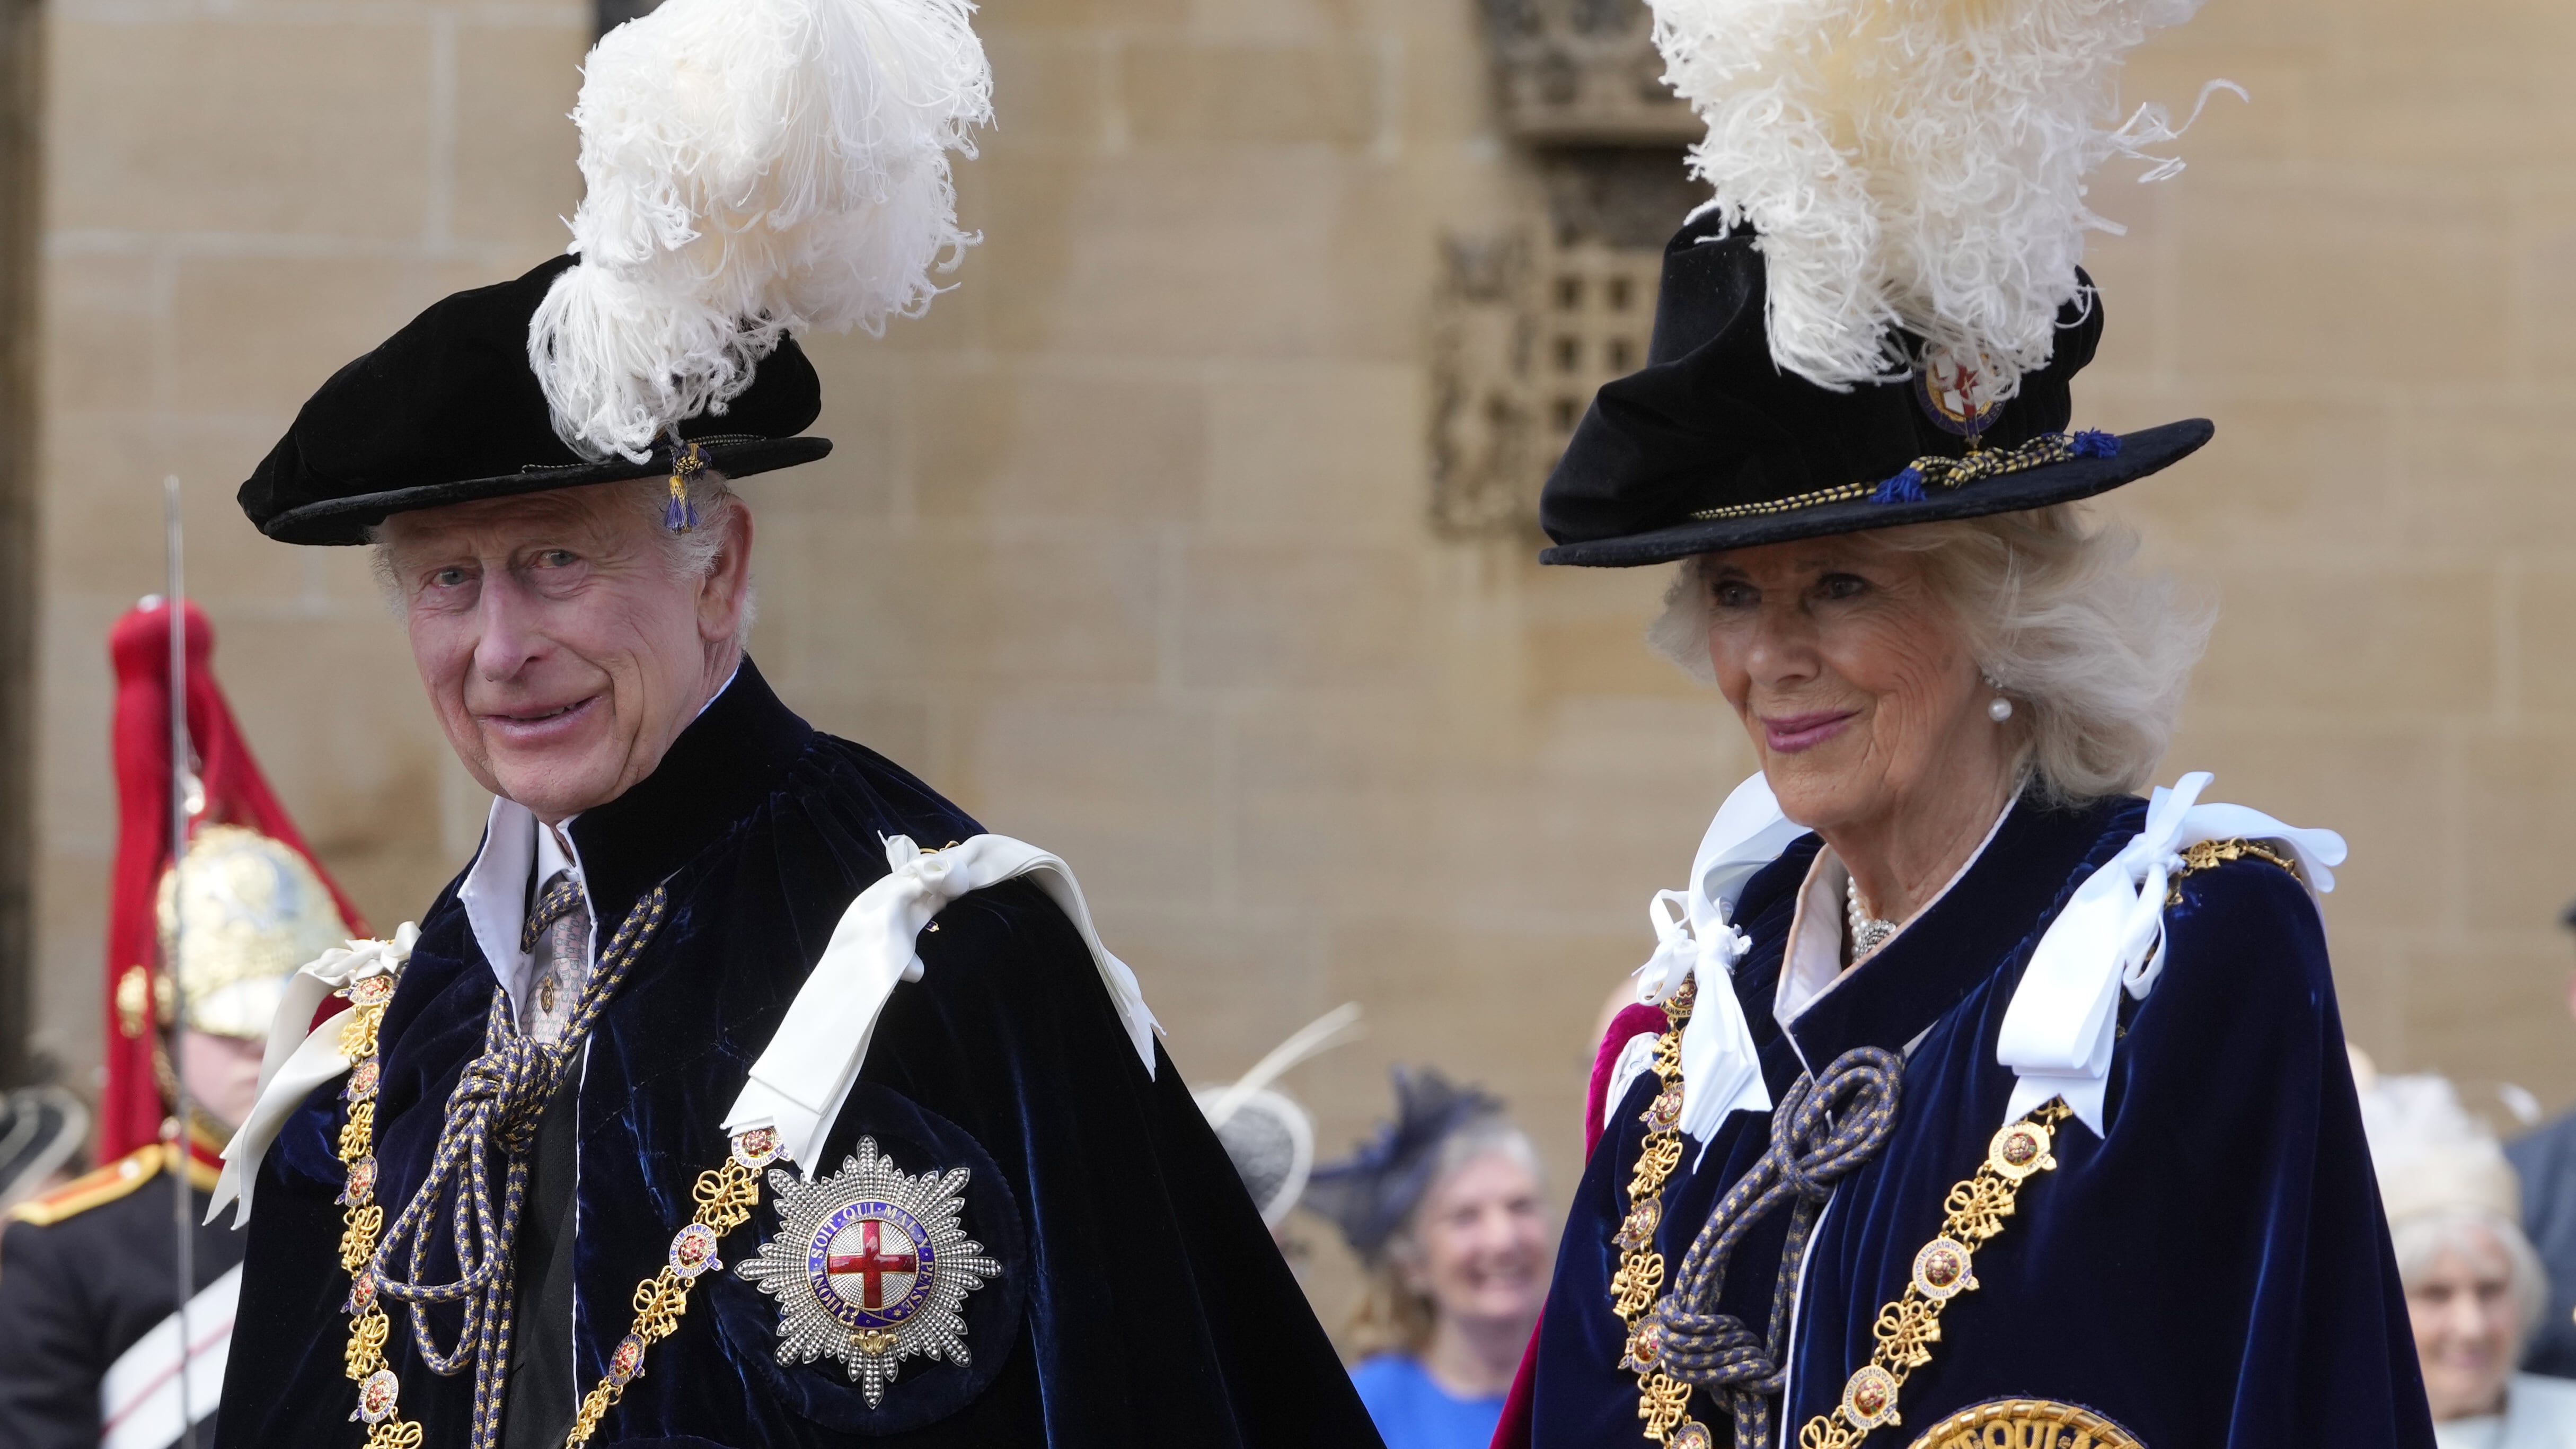 The King and Queen led the monarchy in celebrating the ancient Order of the Garter as the royal family’s summer season began in earnest